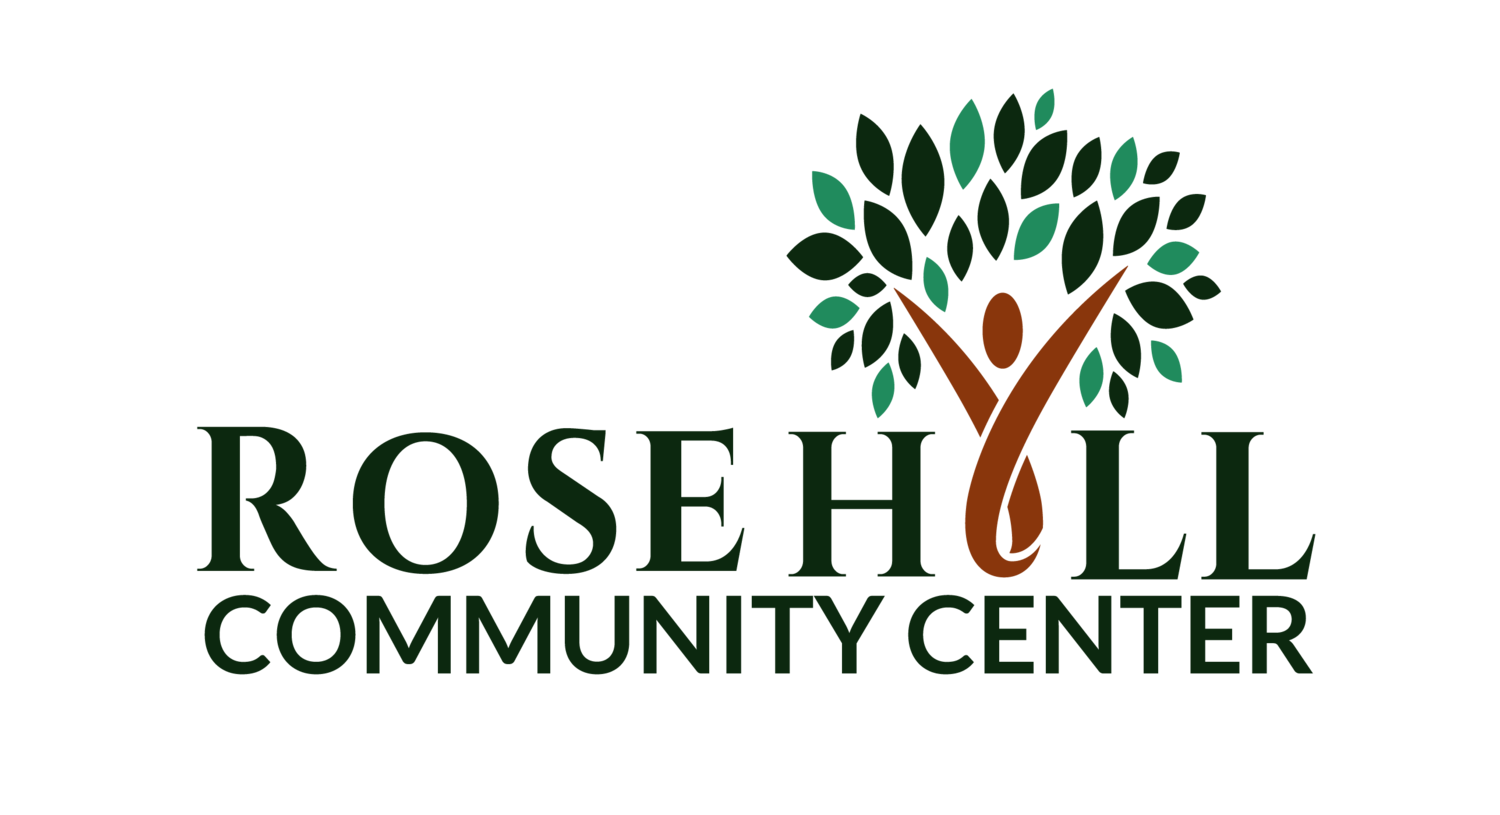 Rose Hill Community Center | Building Strong Individuals, Families and Communities